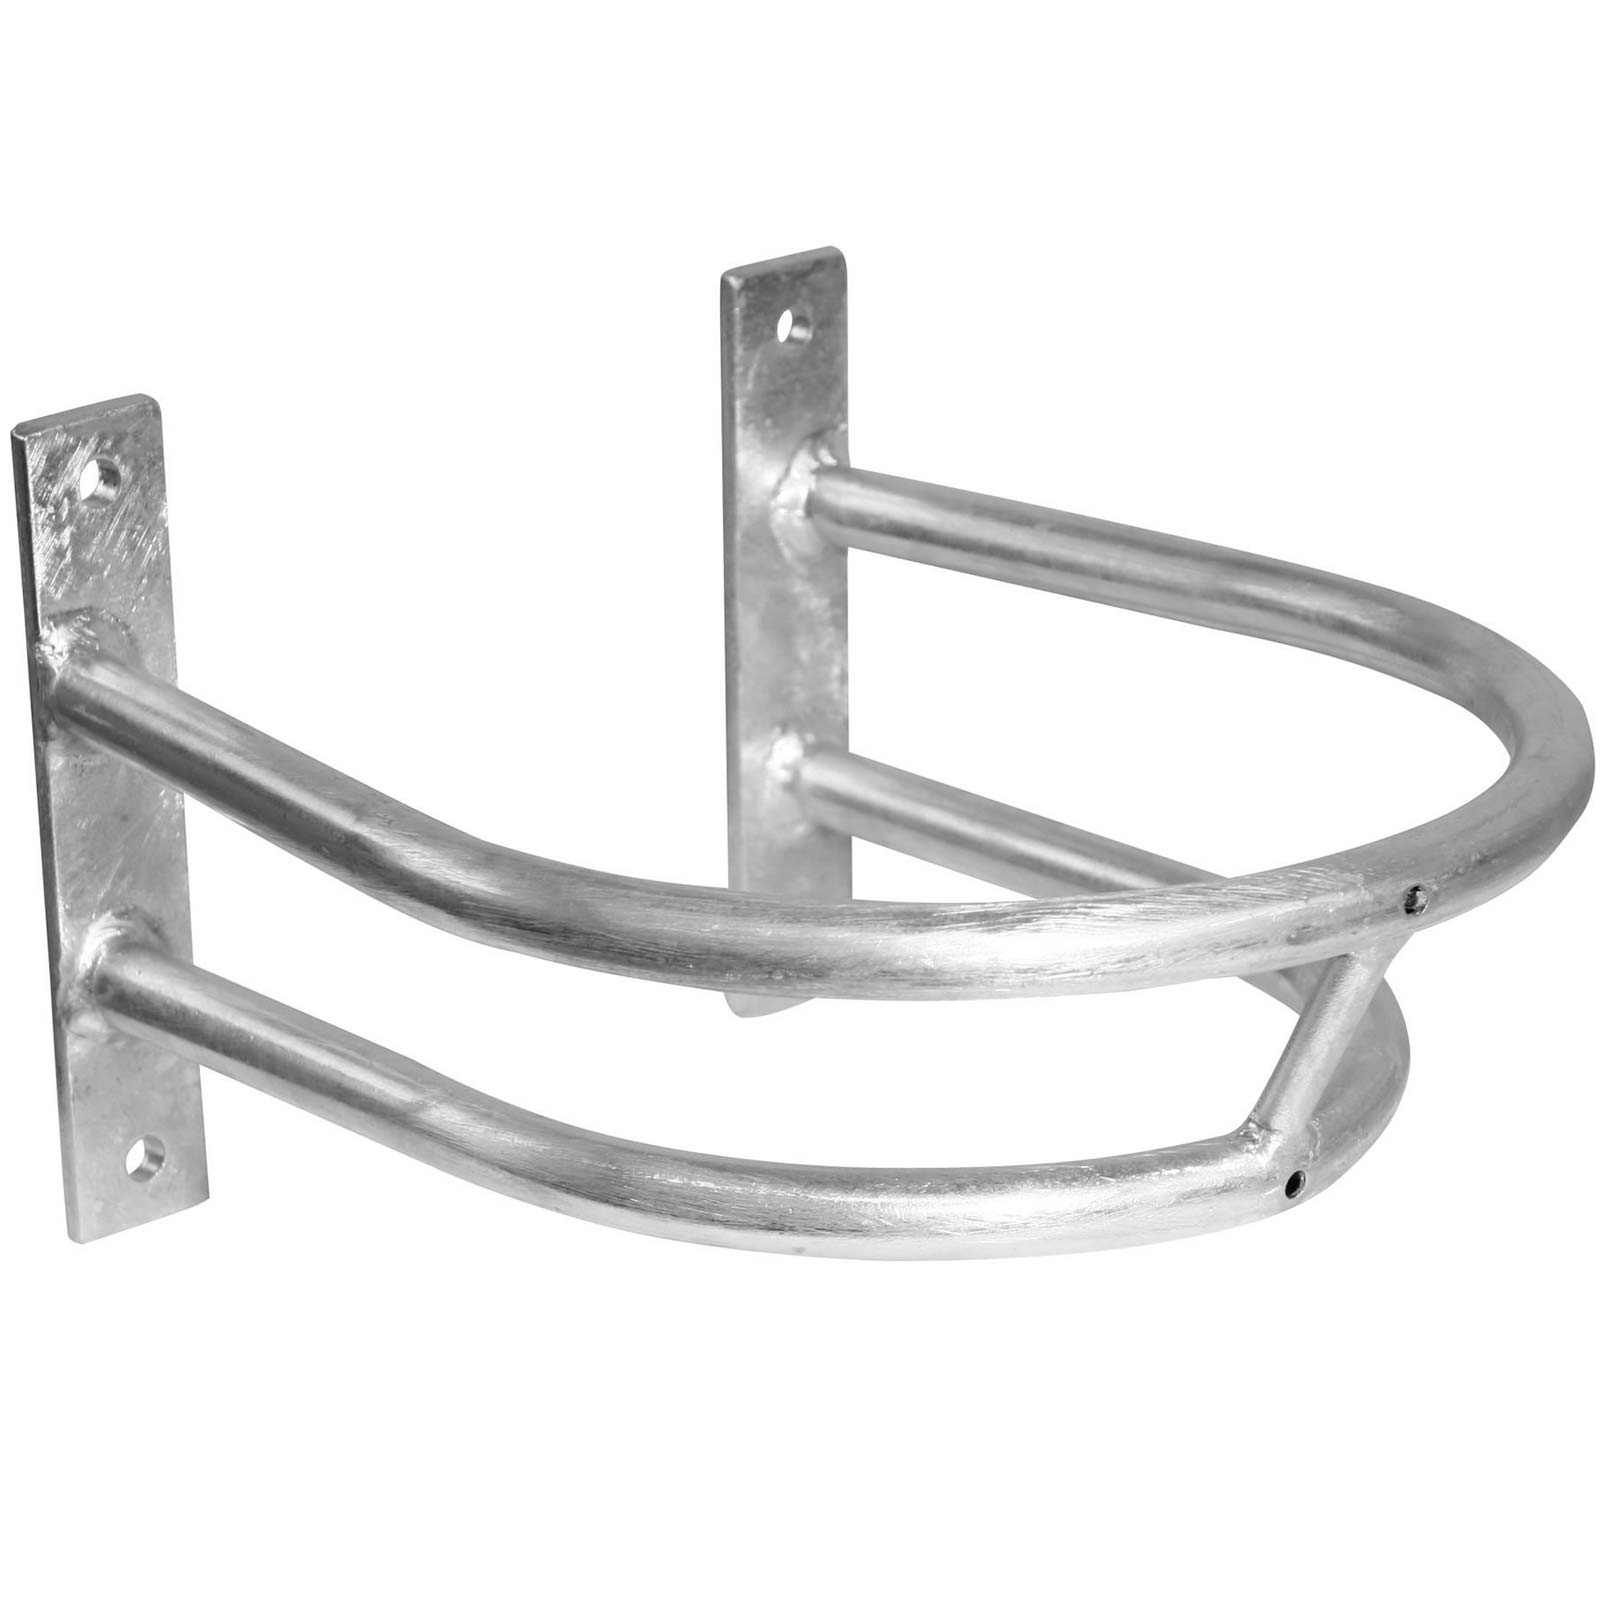 Protection Bracket for Water Bowls S